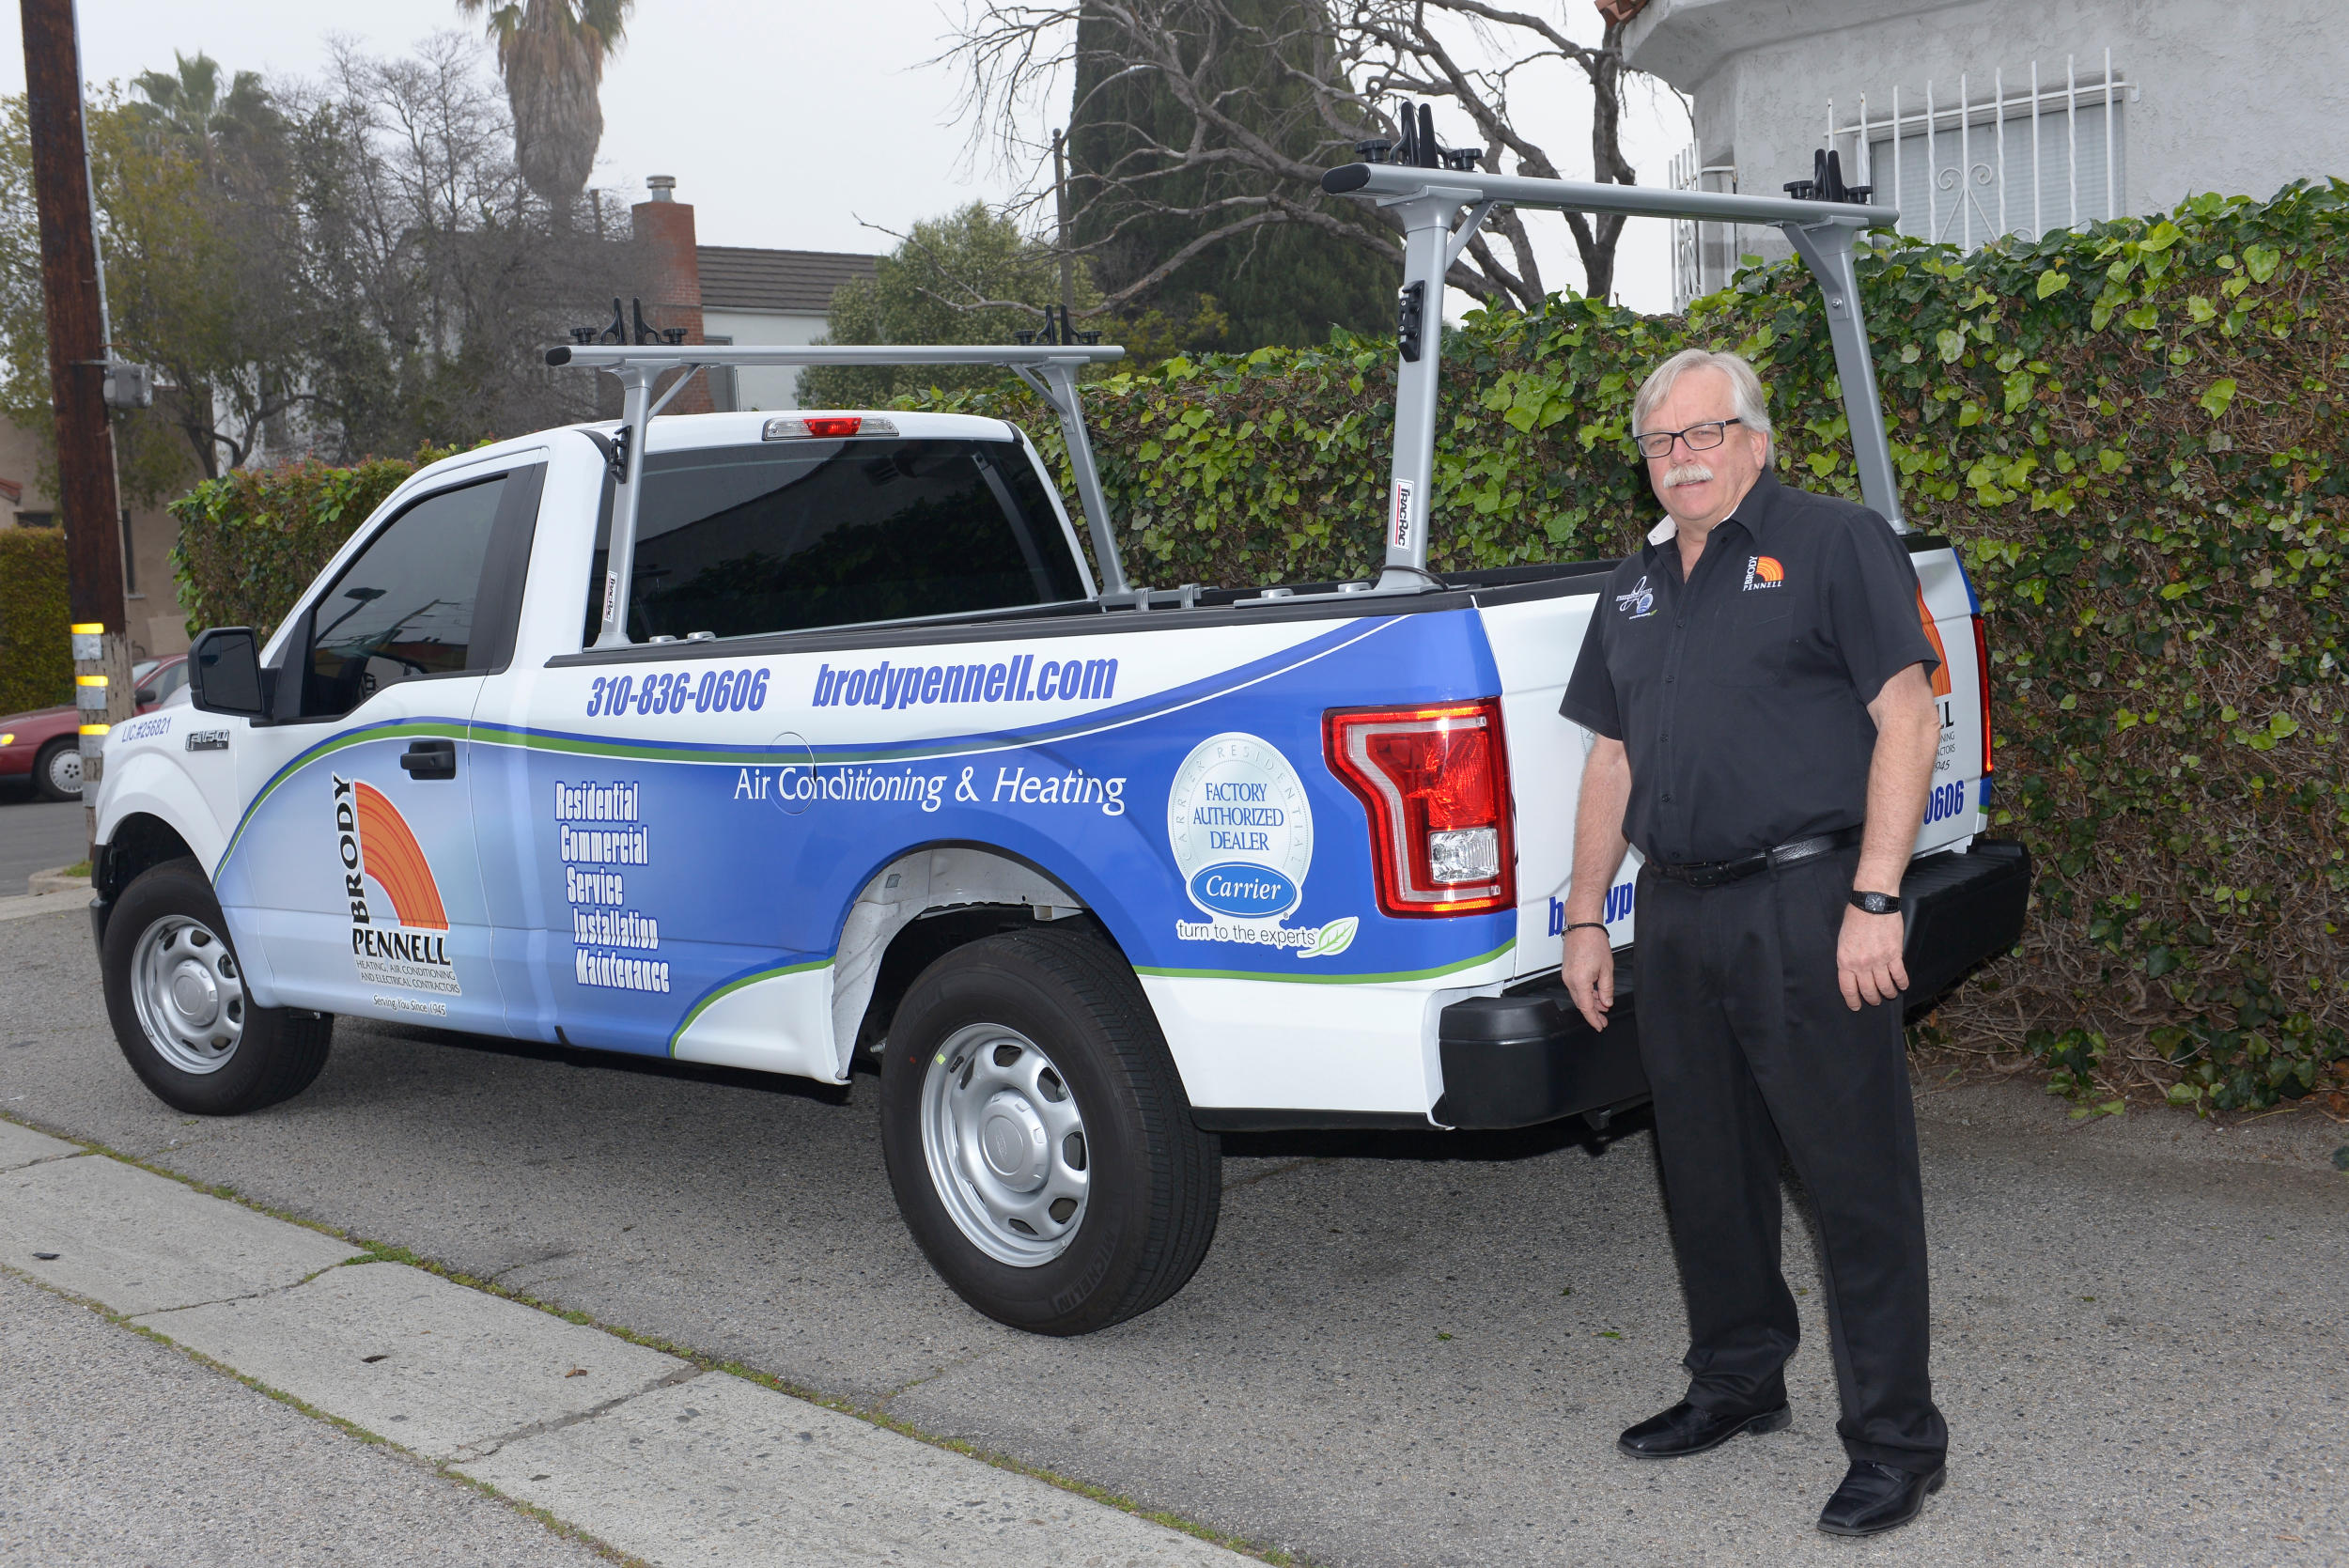 Brody Pennell Heating & Air Conditioning Photo